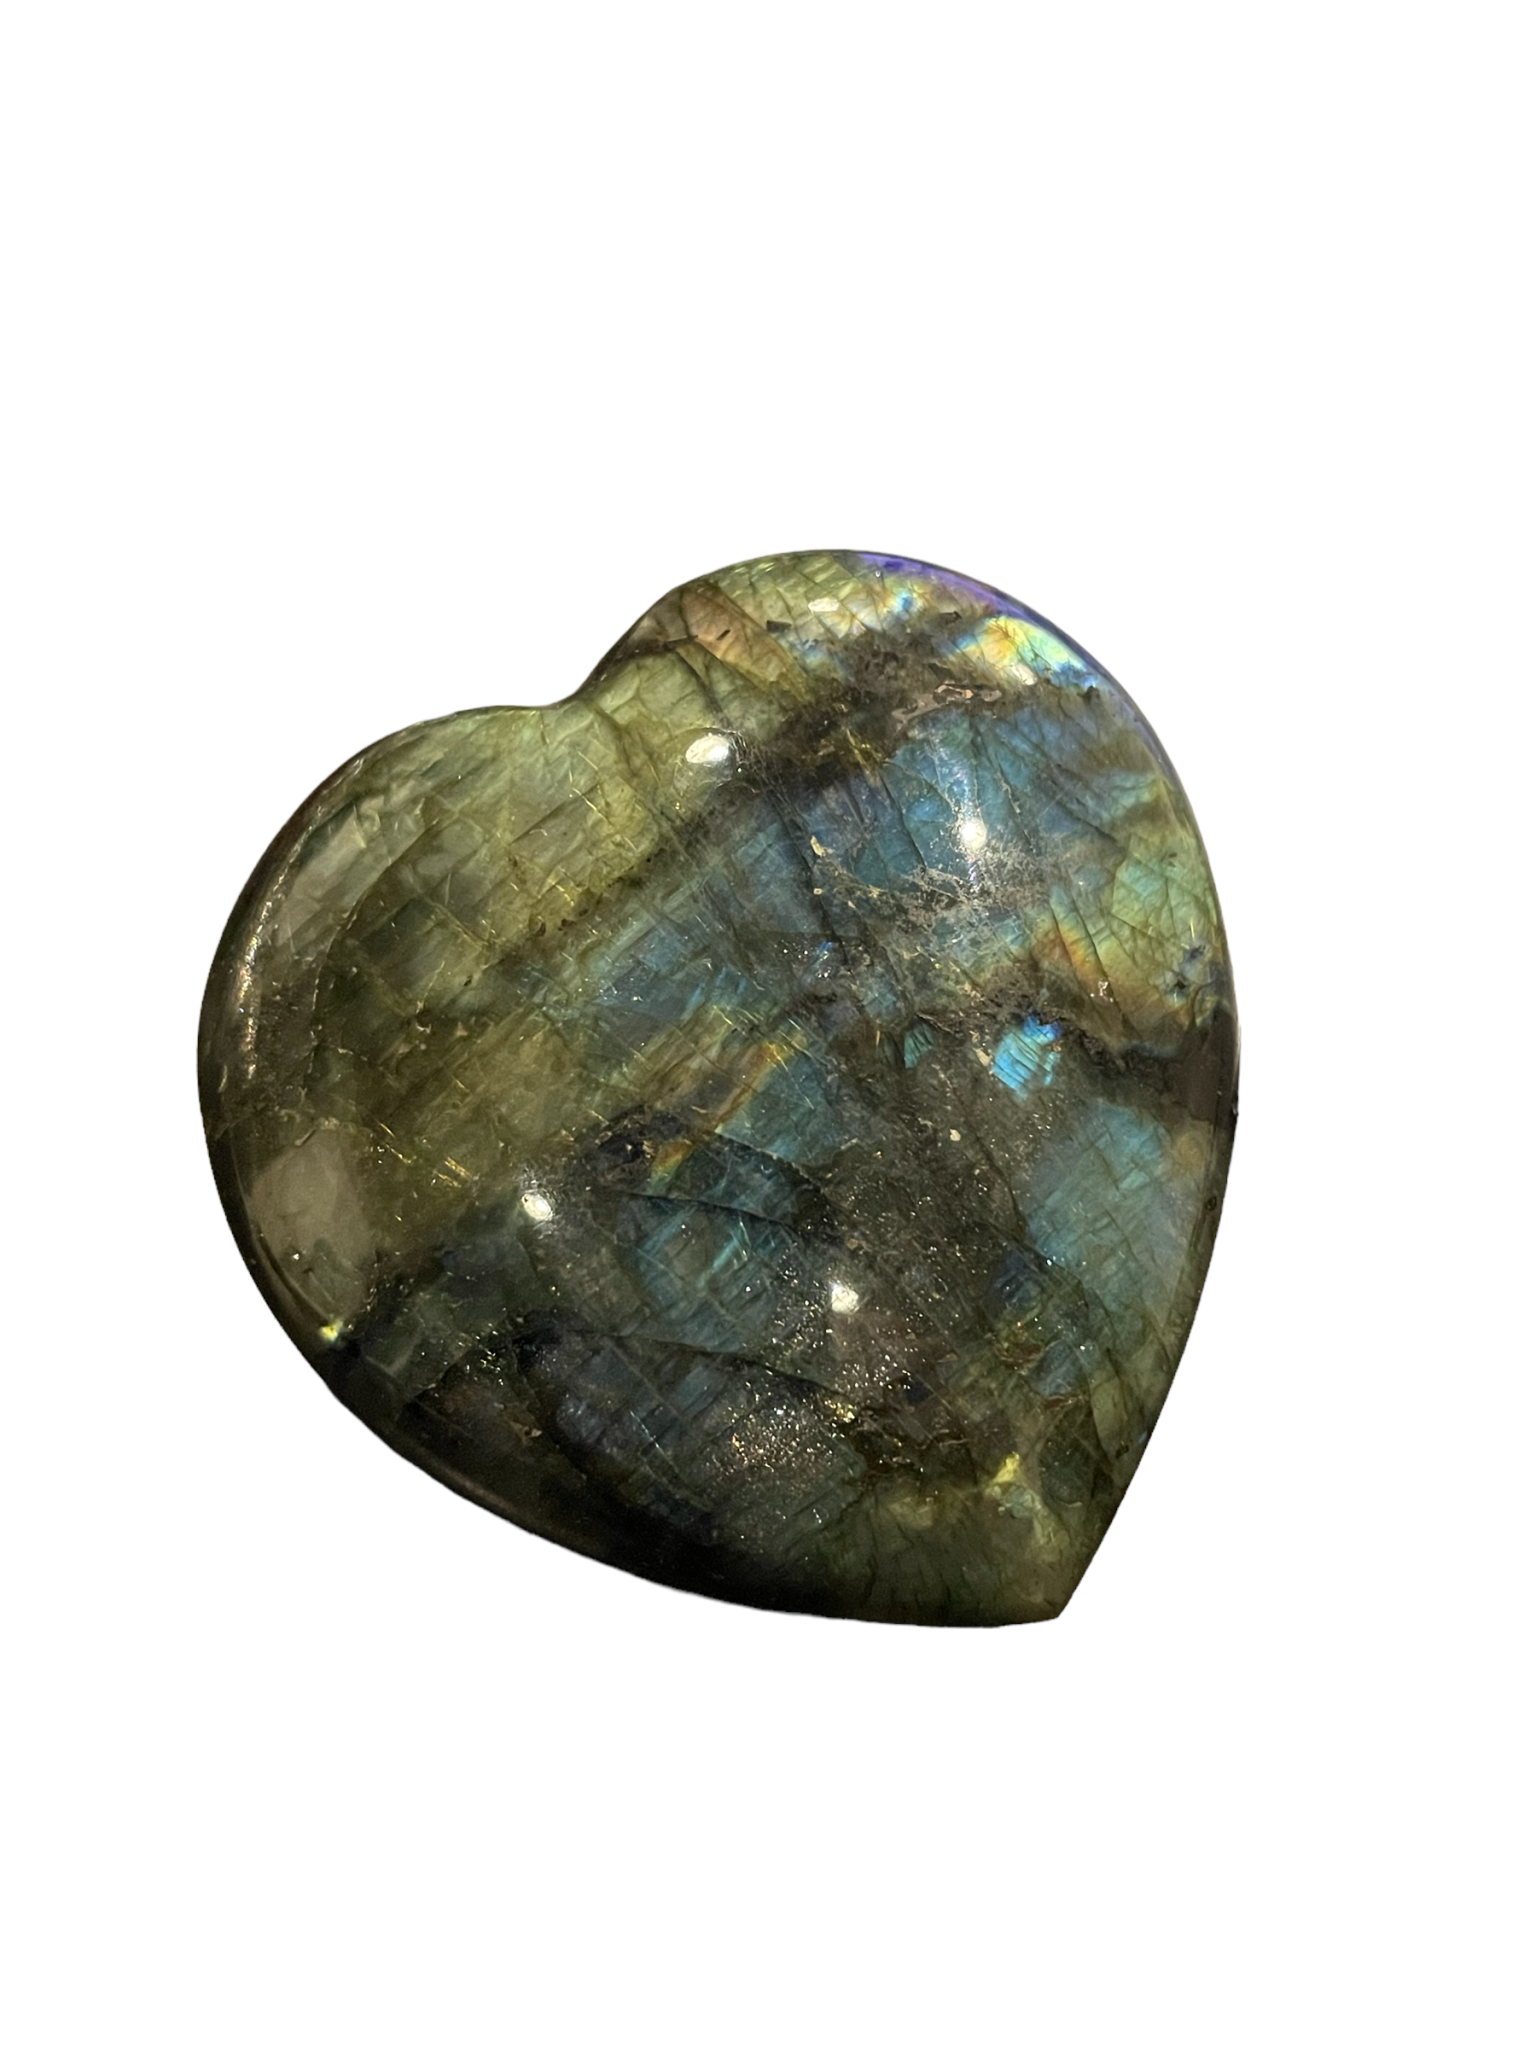 Hand Carved Labradorite Stone Heart - Approx 8-9cm - Each heart is individual and will vary from this image.-1